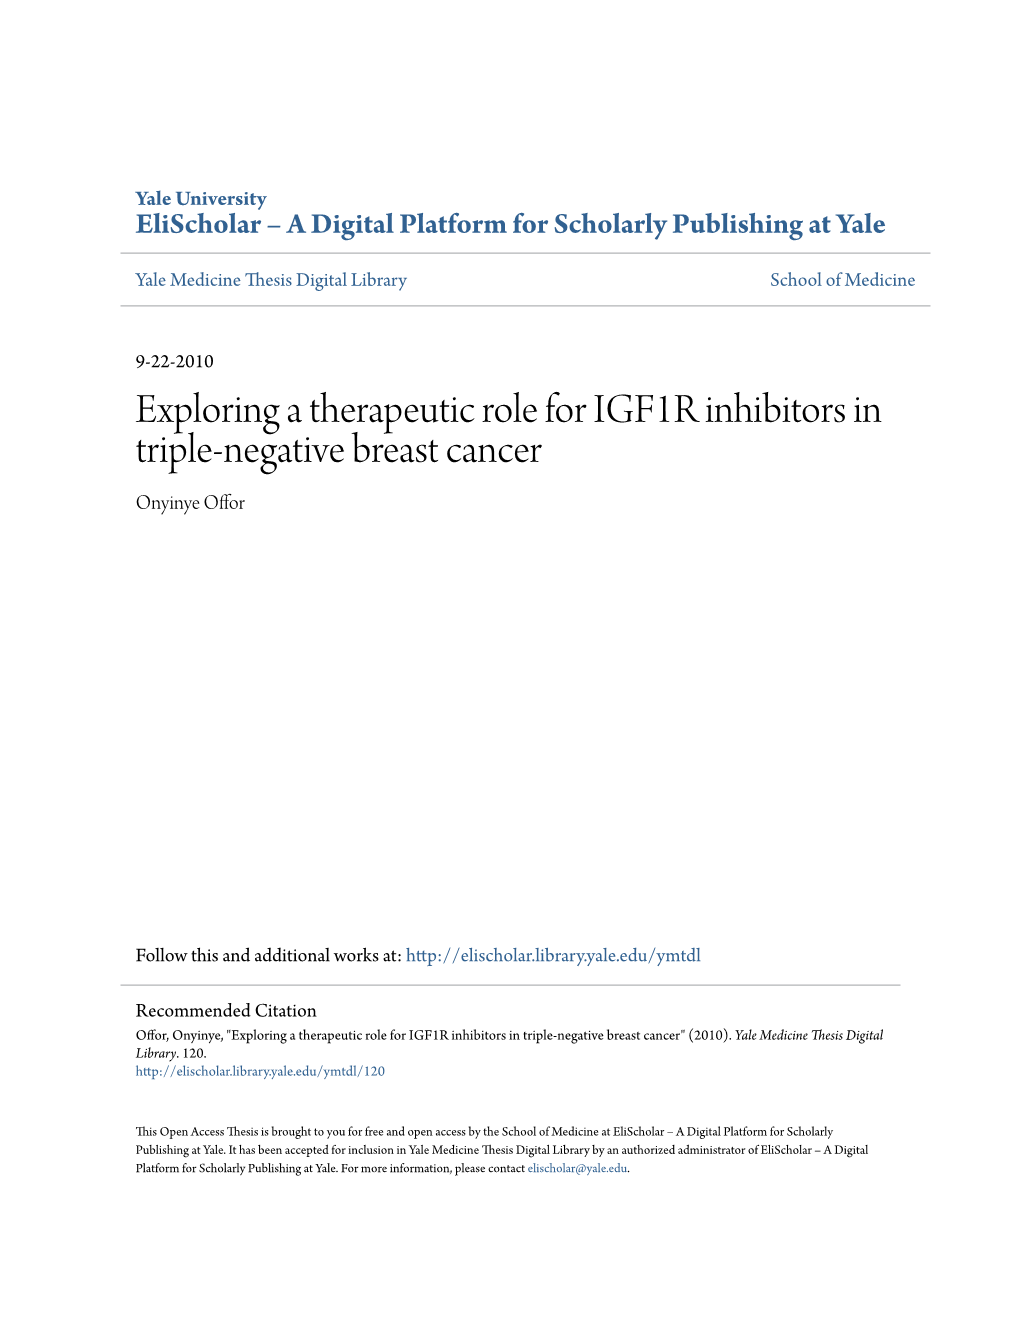 Exploring a Therapeutic Role for IGF1R Inhibitors in Triple-Negative Breast Cancer Onyinye Offor